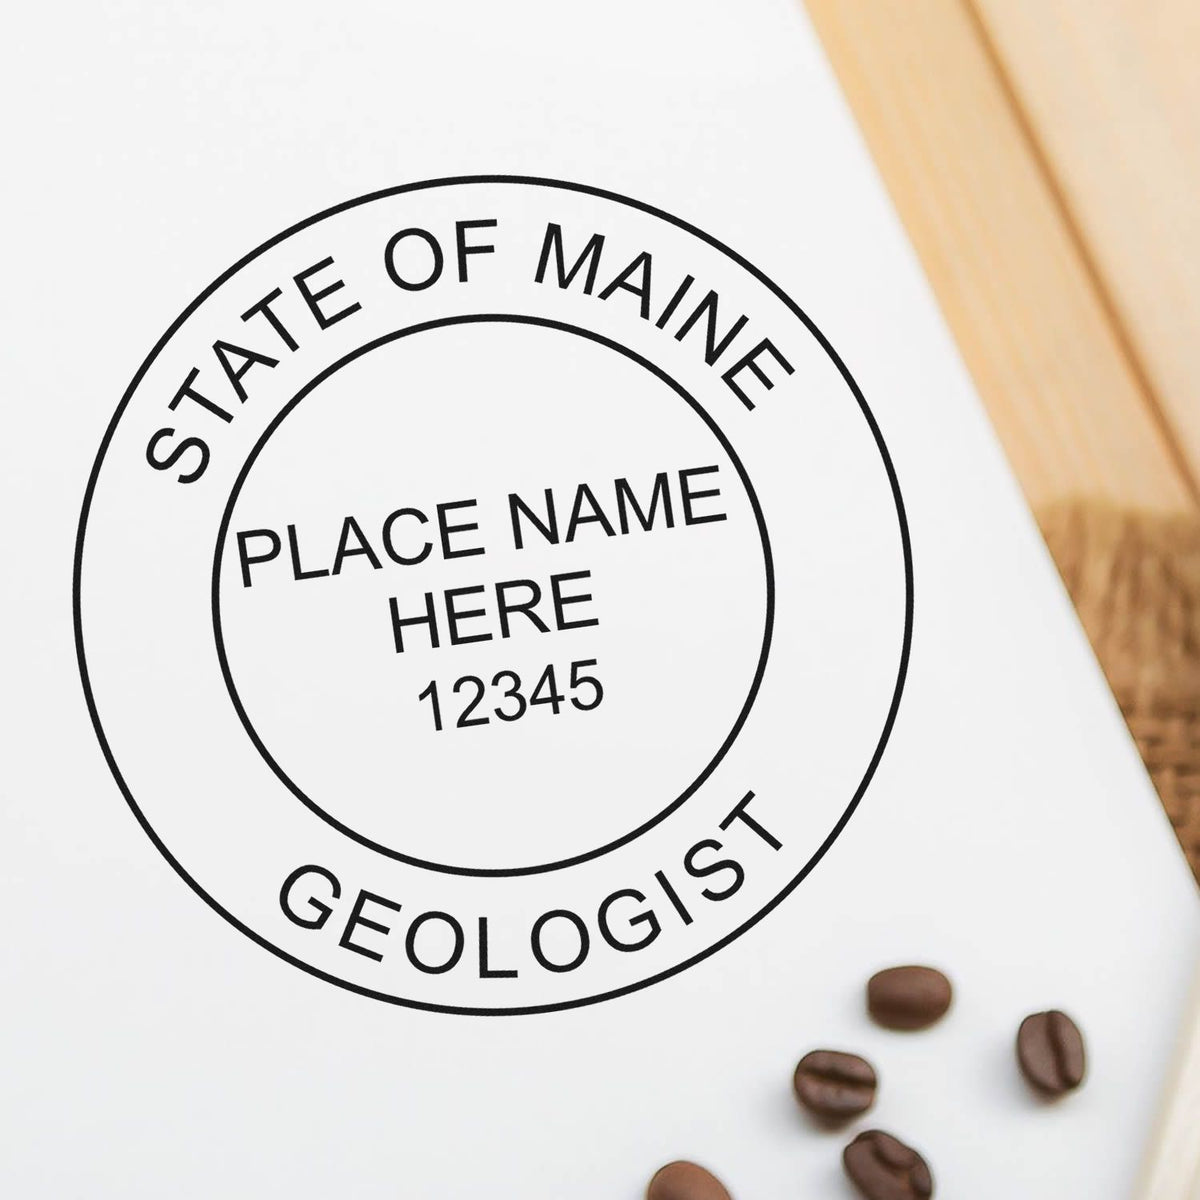 A photograph of the Maine Professional Geologist Seal Stamp stamp impression reveals a vivid, professional image of the on paper.